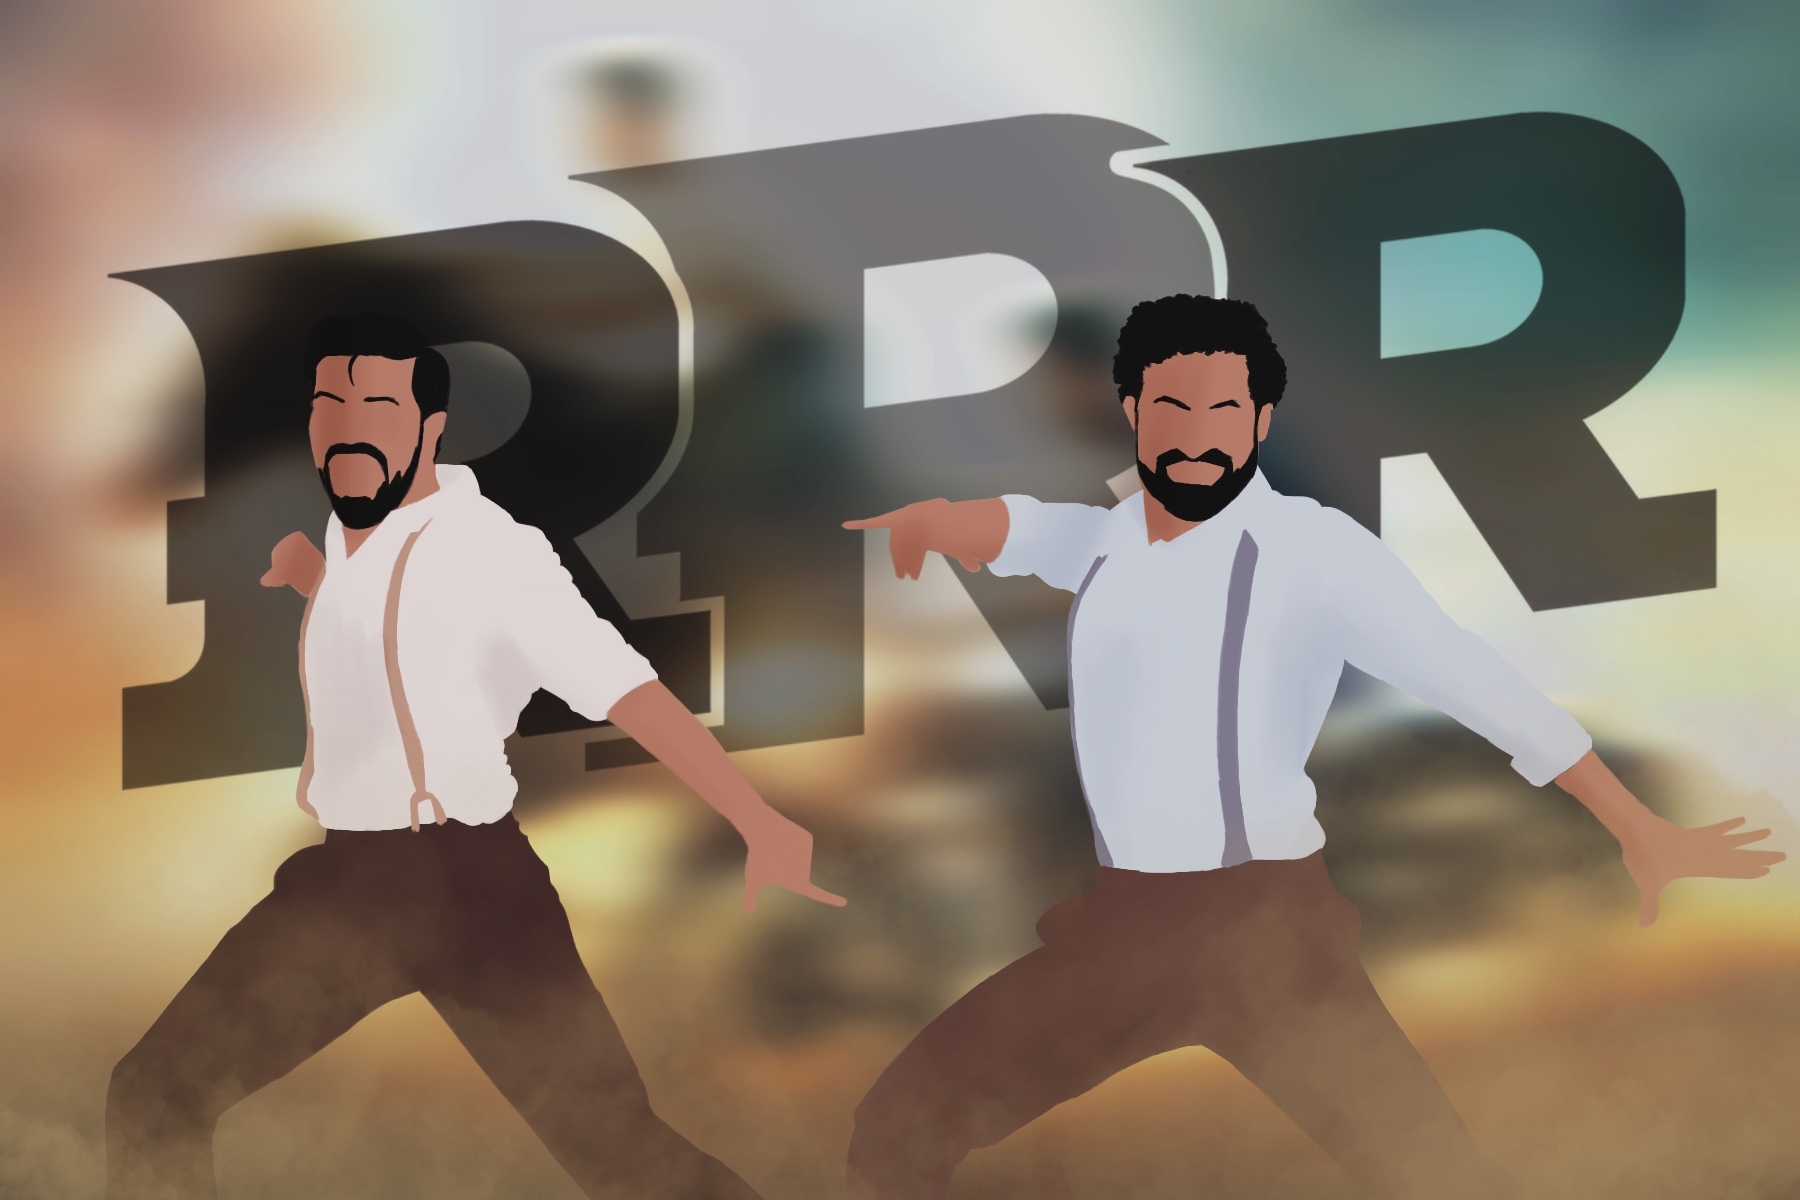 Two bearded men wearing pale shirts, brown pants and suspenders strike energetic dance poses before the large letters "RRR."